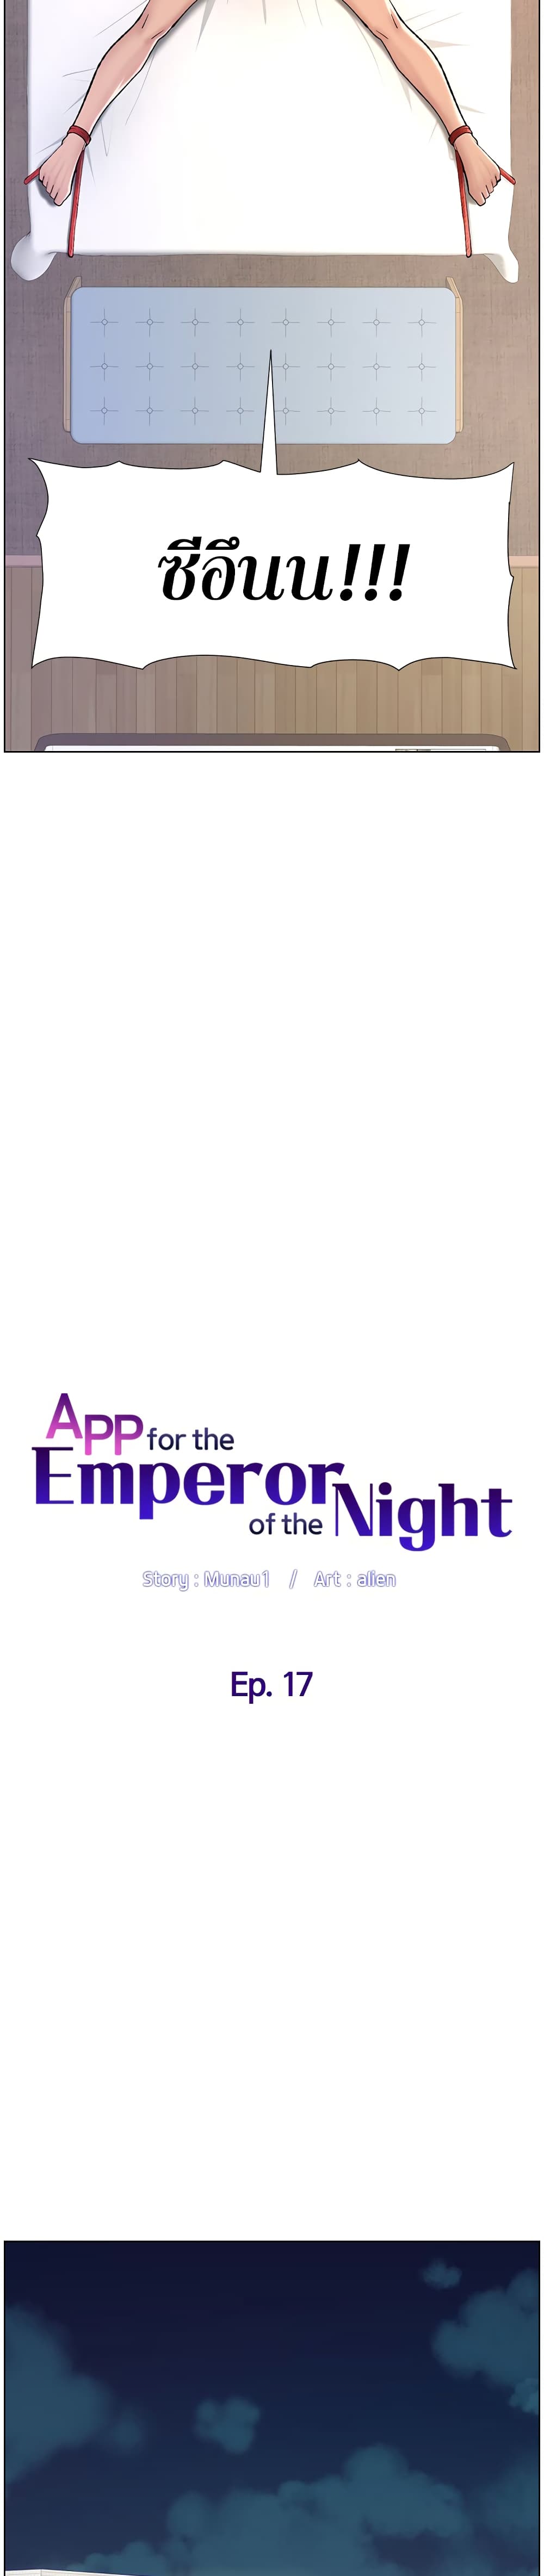 APP for the Emperor of the Night 17 (4)